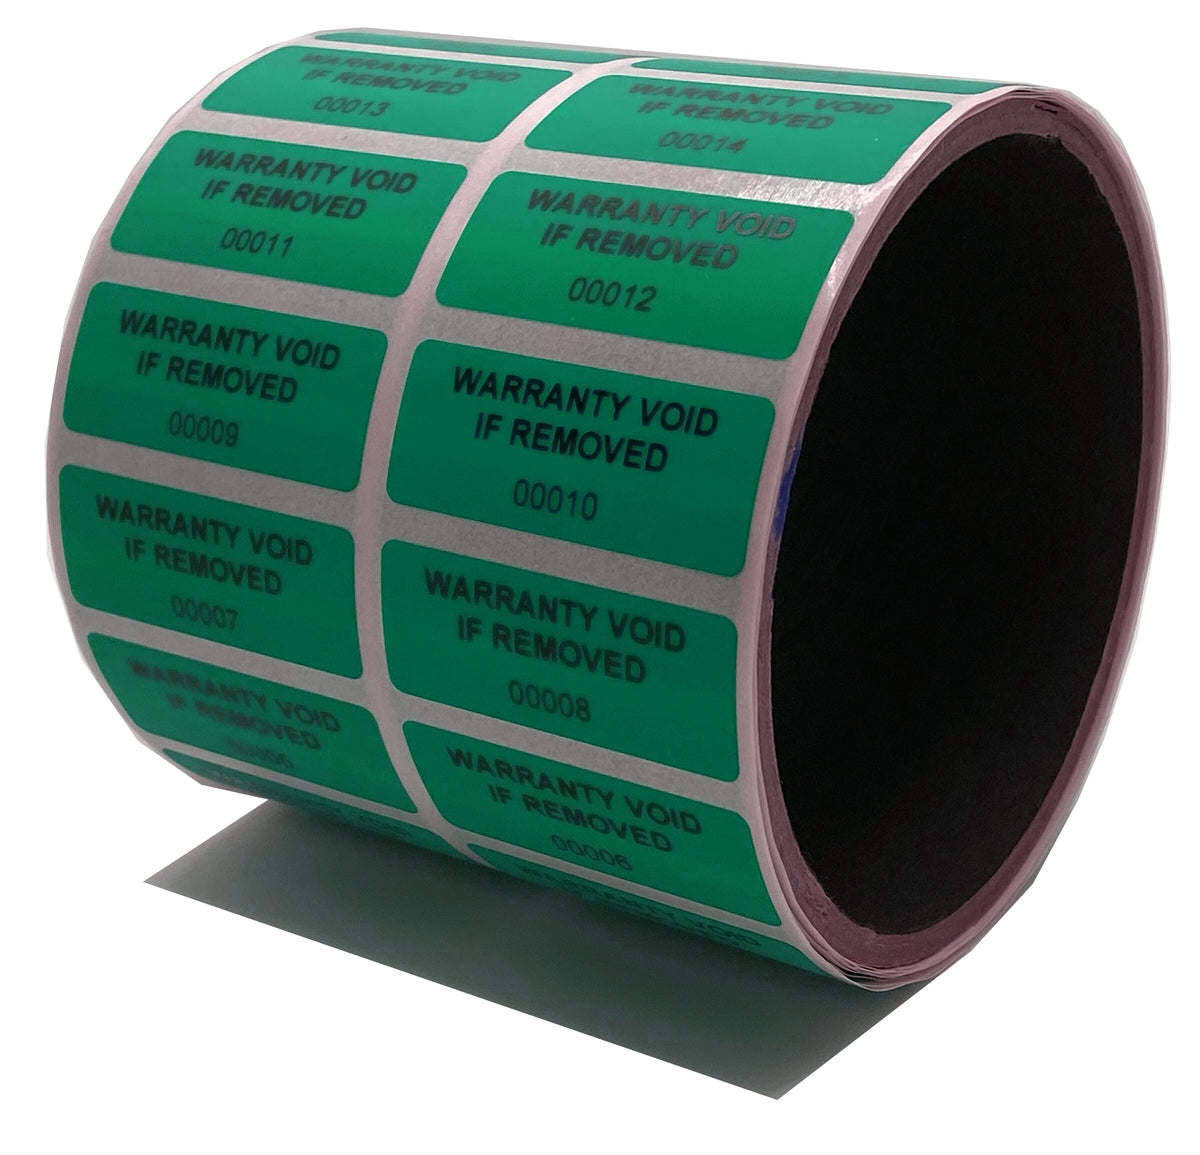 1,000 Tamper-Evident Green Non Residue Security Labels TamperGuard® Seal Sticker, Rectangle 1.5" x 0.6" (38mm x 15mm). Printed: Warranty Void if Removed + Serialized